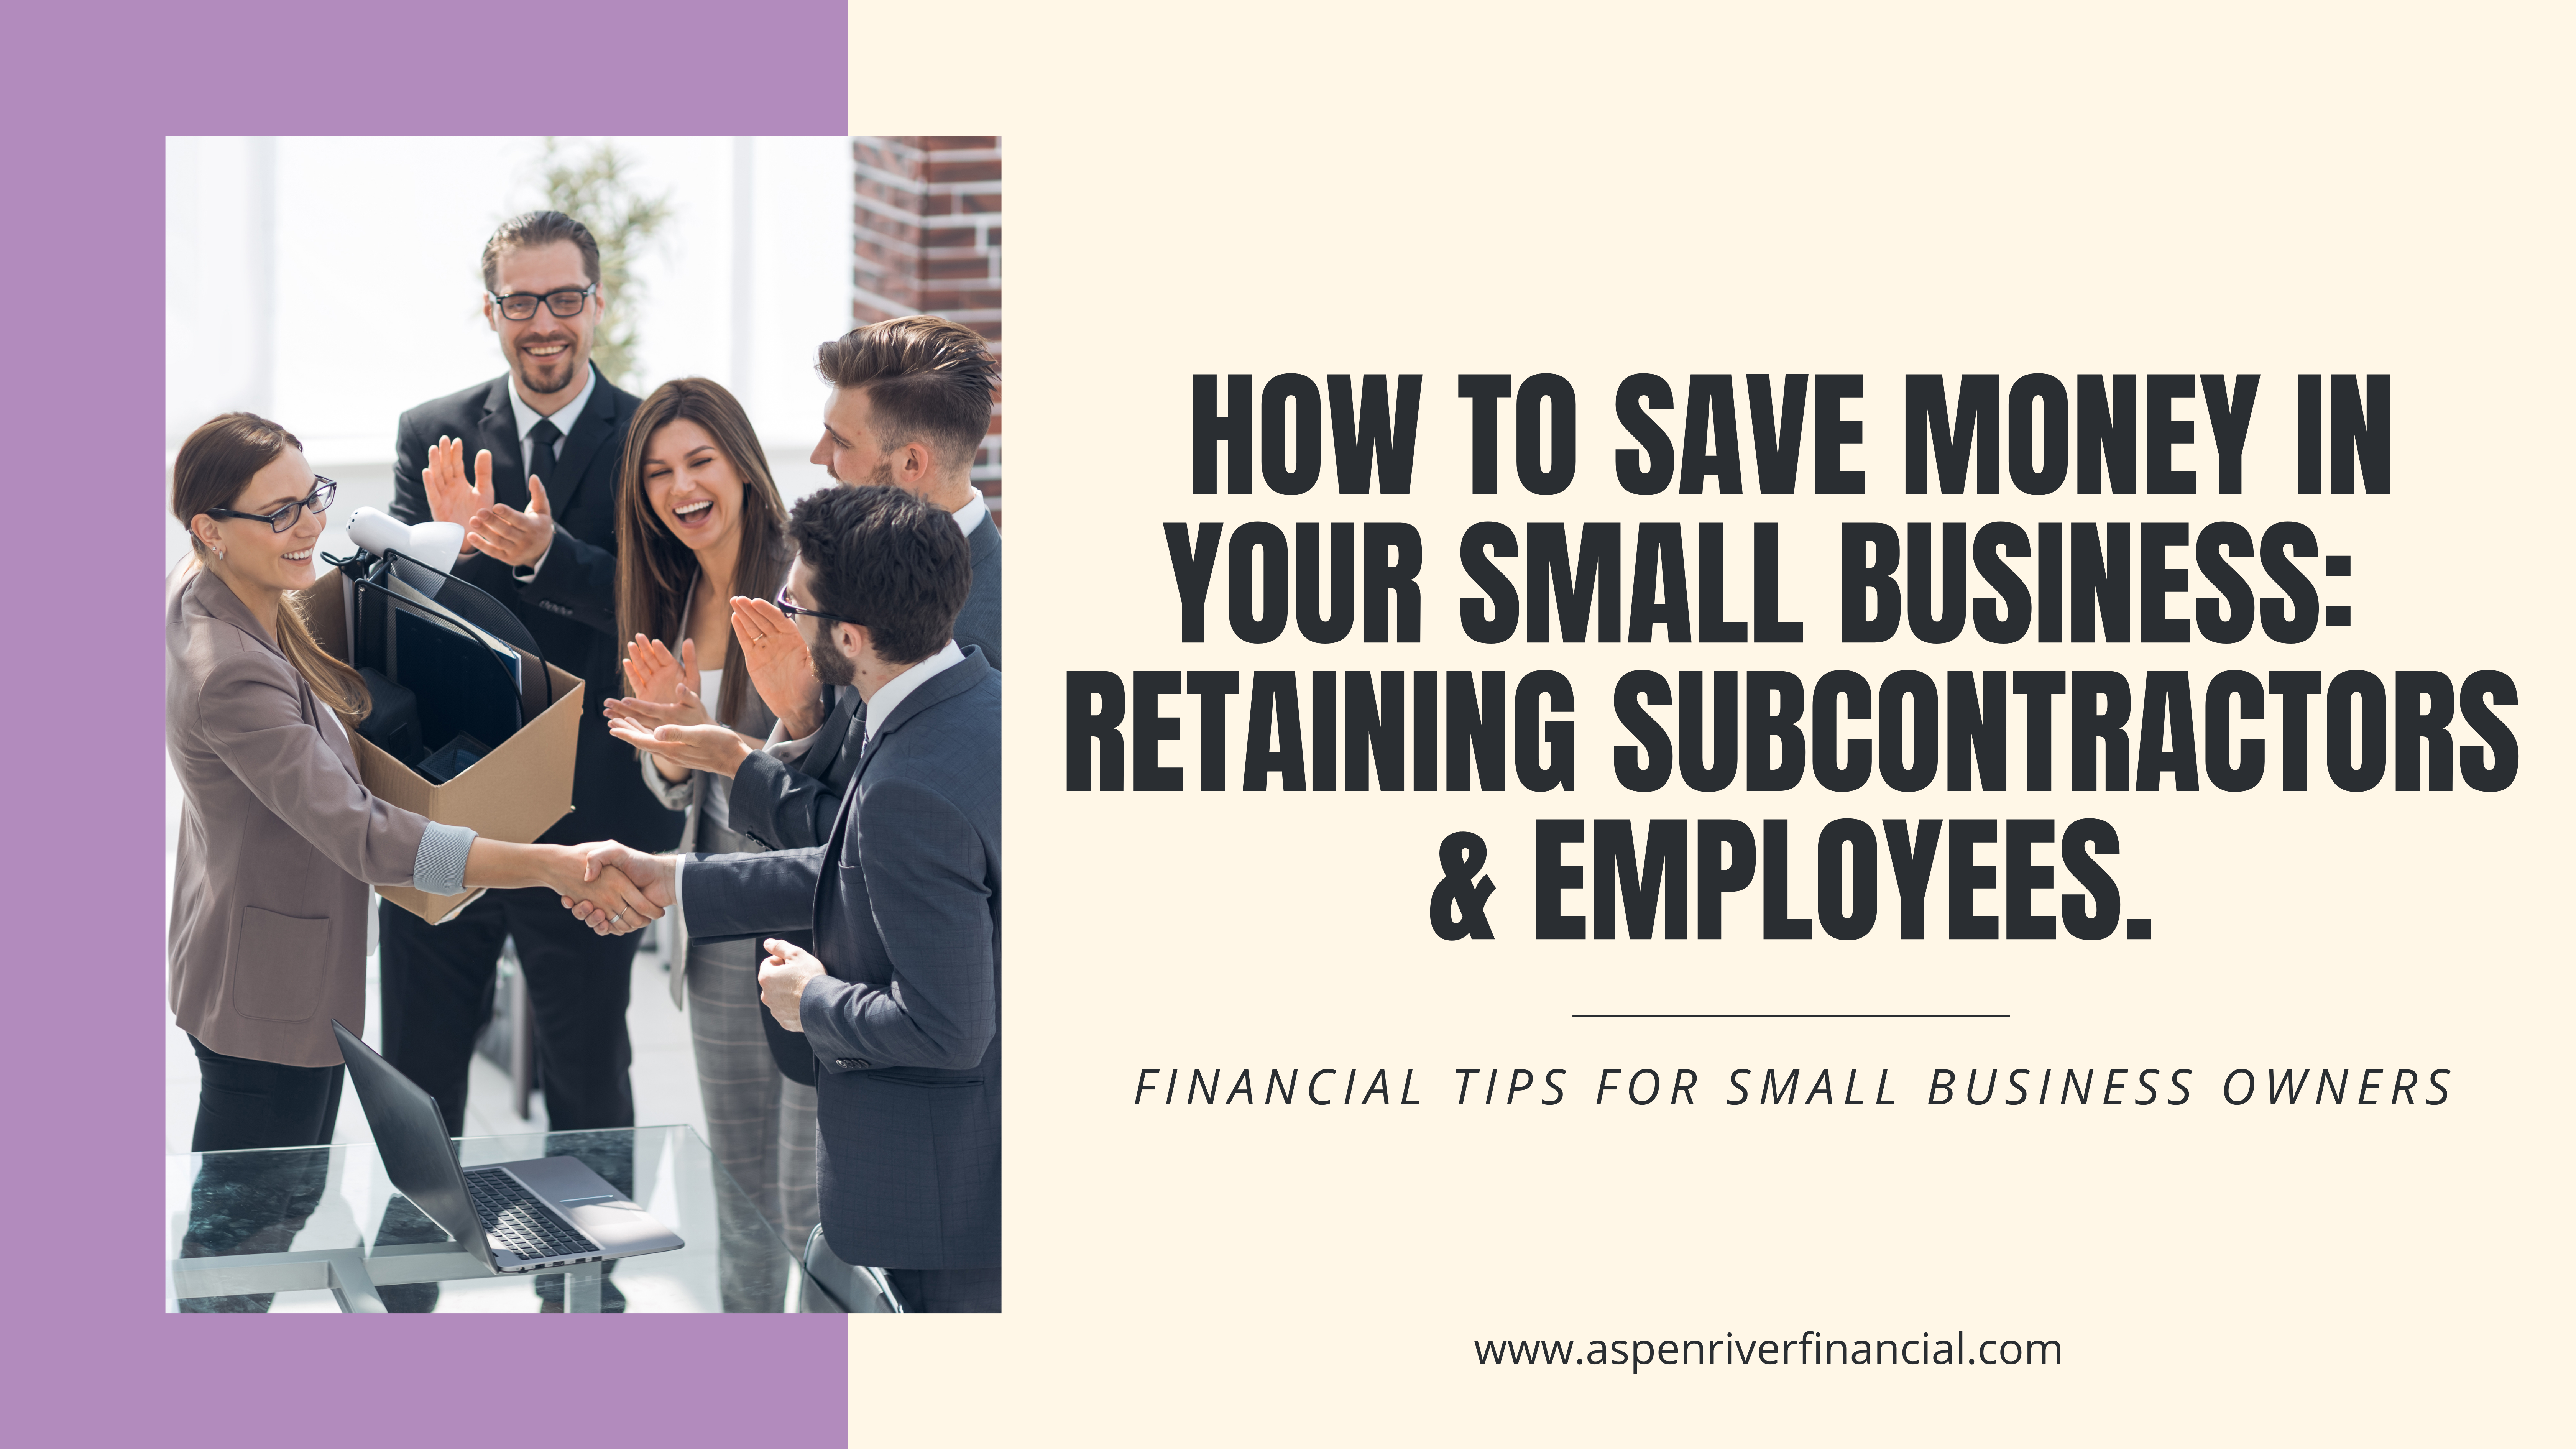 How to save money in your small business:  Retaining subcontractors and employees